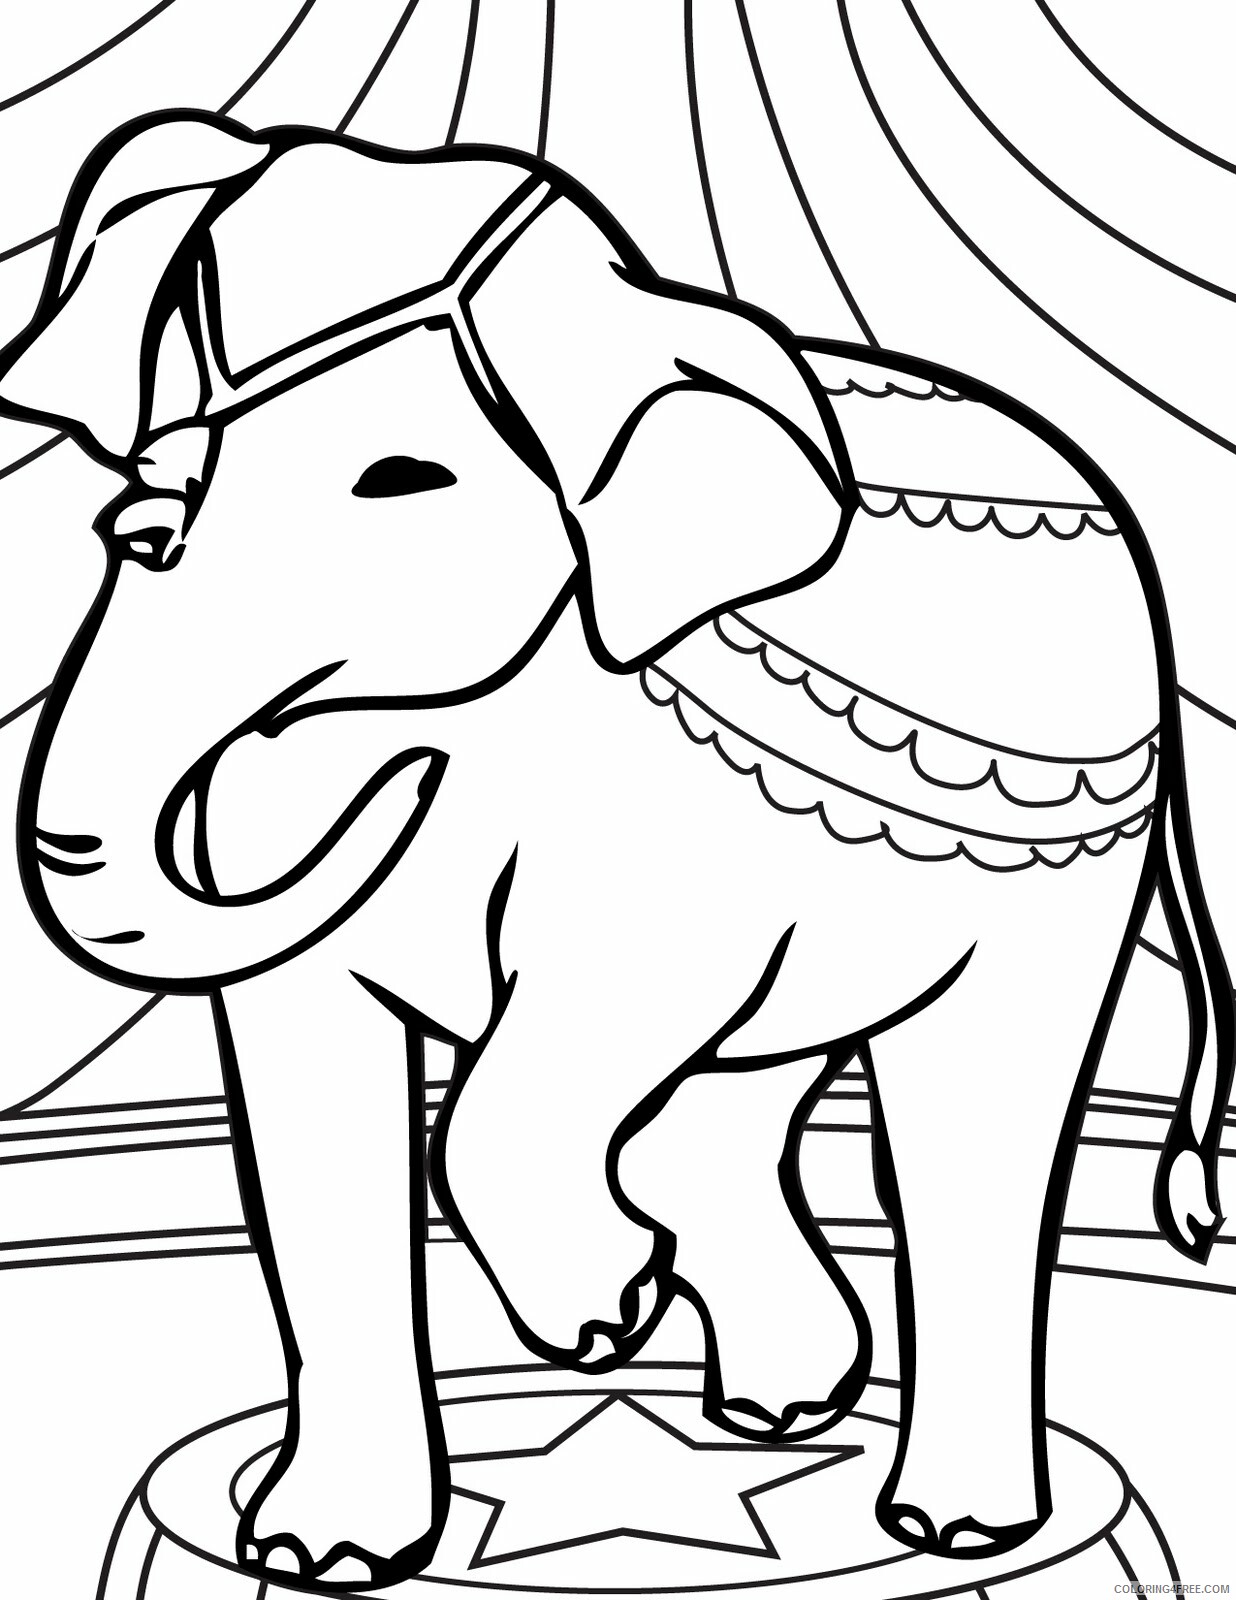 Elephant Coloring Pages Animal Printable Sheets elephant to print 2021 Coloring4free